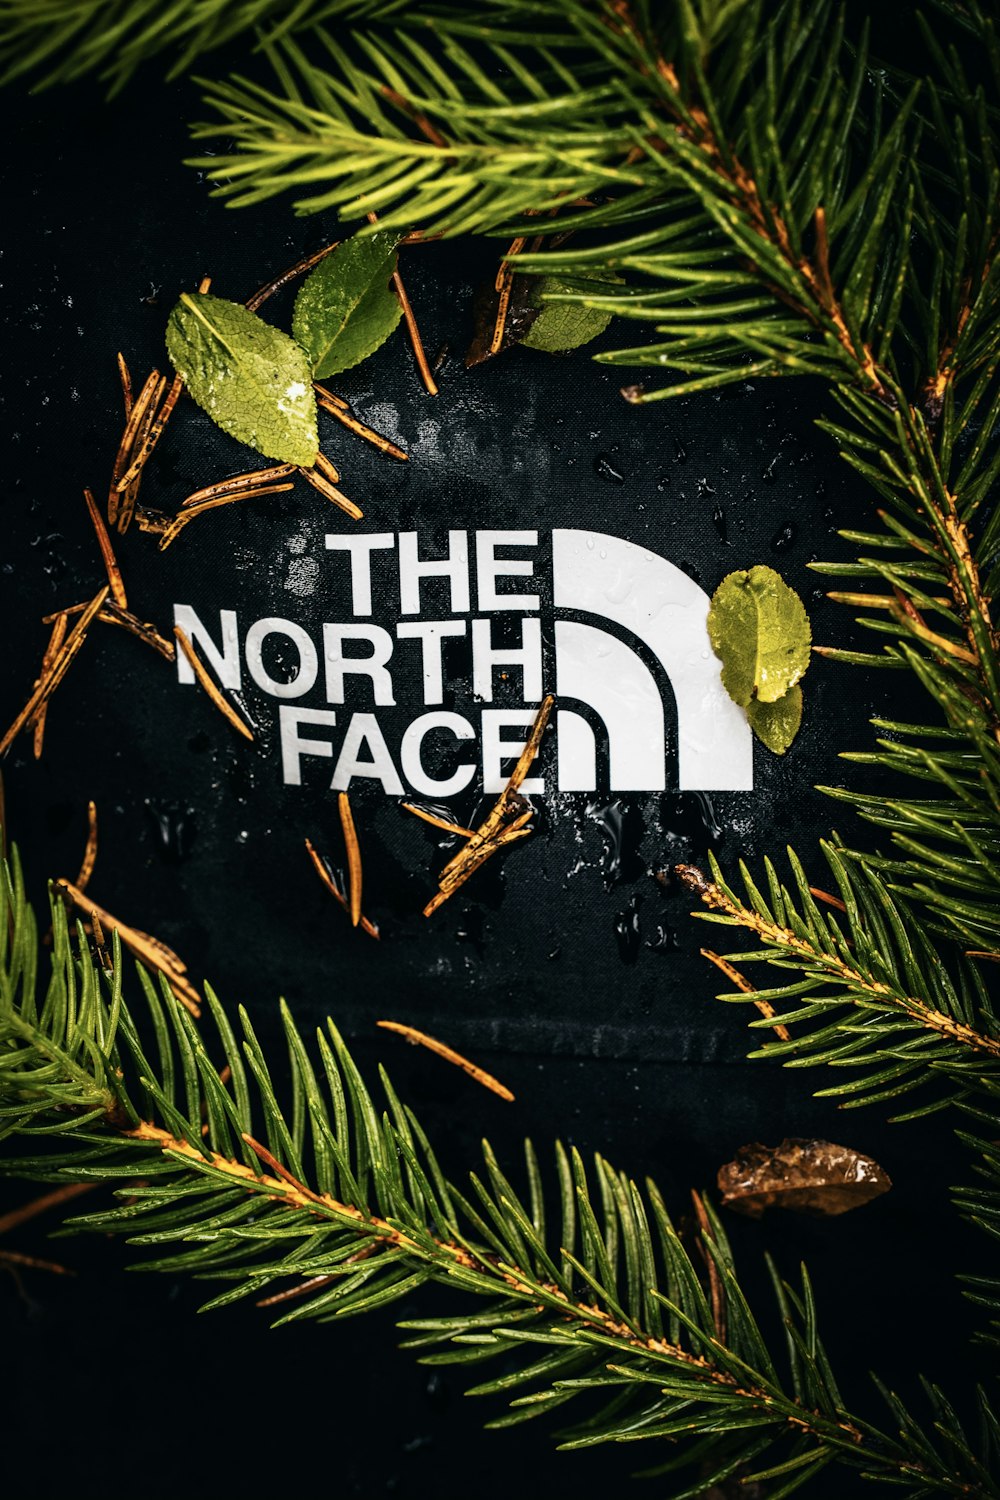 The North Face Pictures | Download Free Images on Unsplash